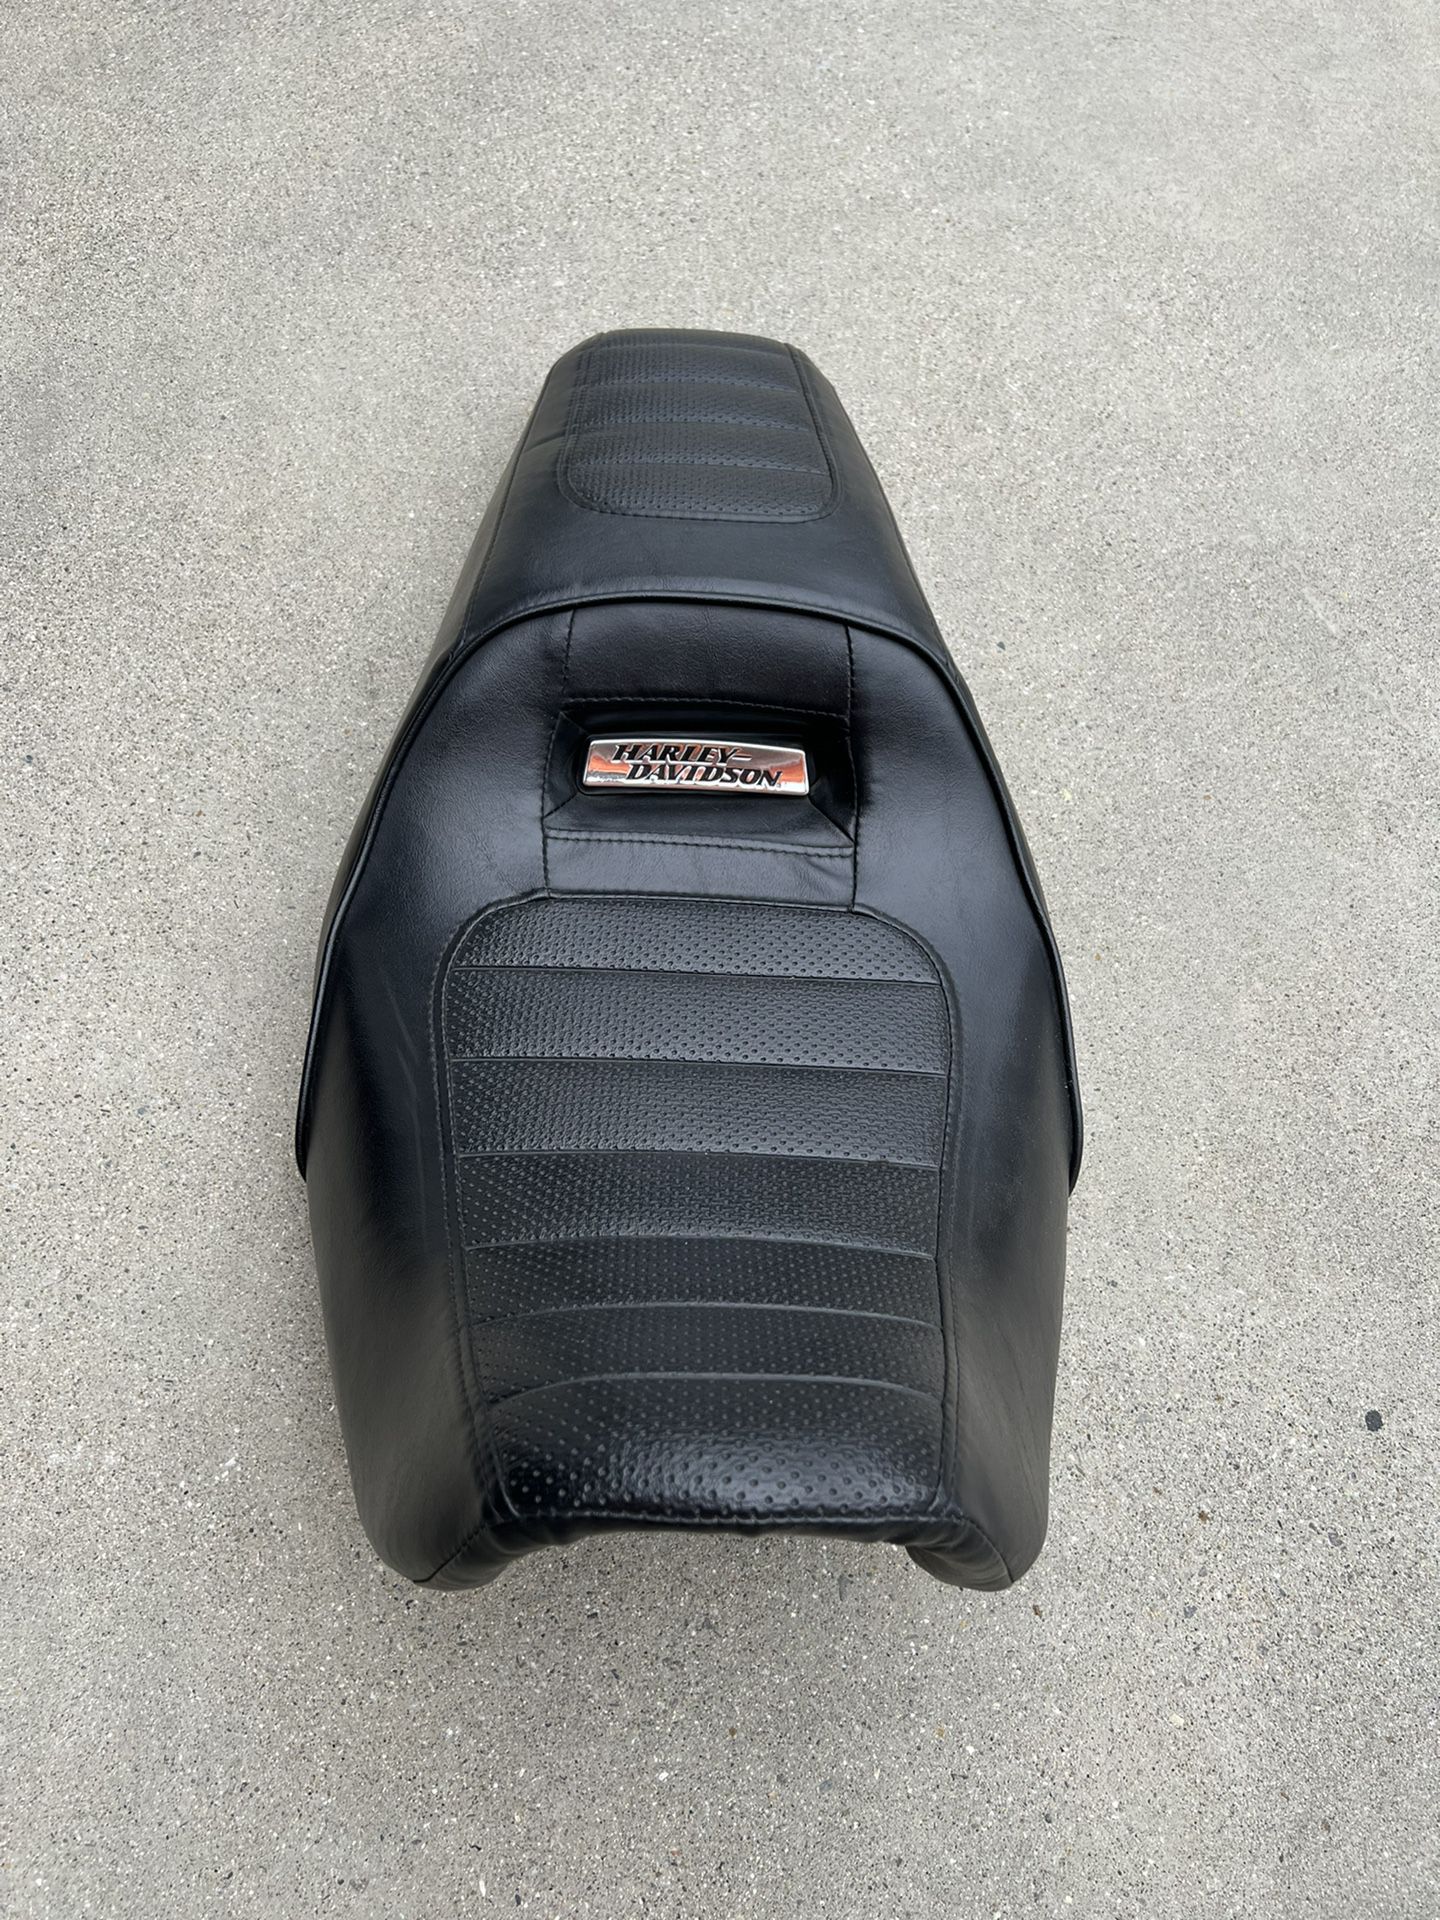 Harley Davidson Dyna Seat In Perfect Condition